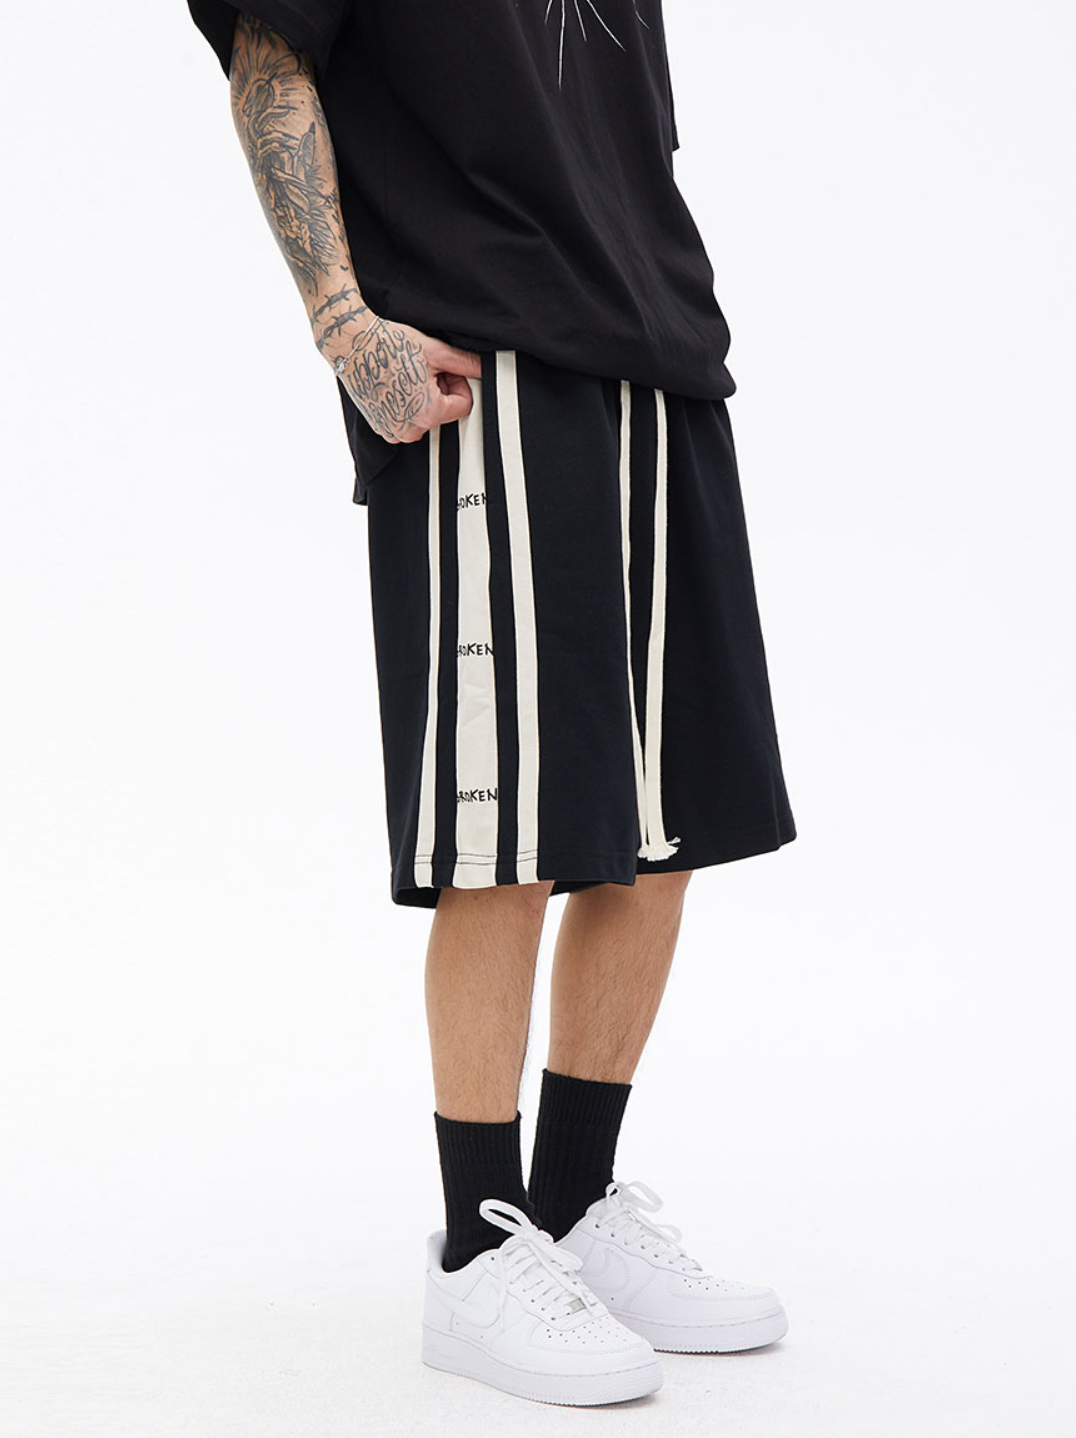 Contrast Color Striped Basketball Shorts